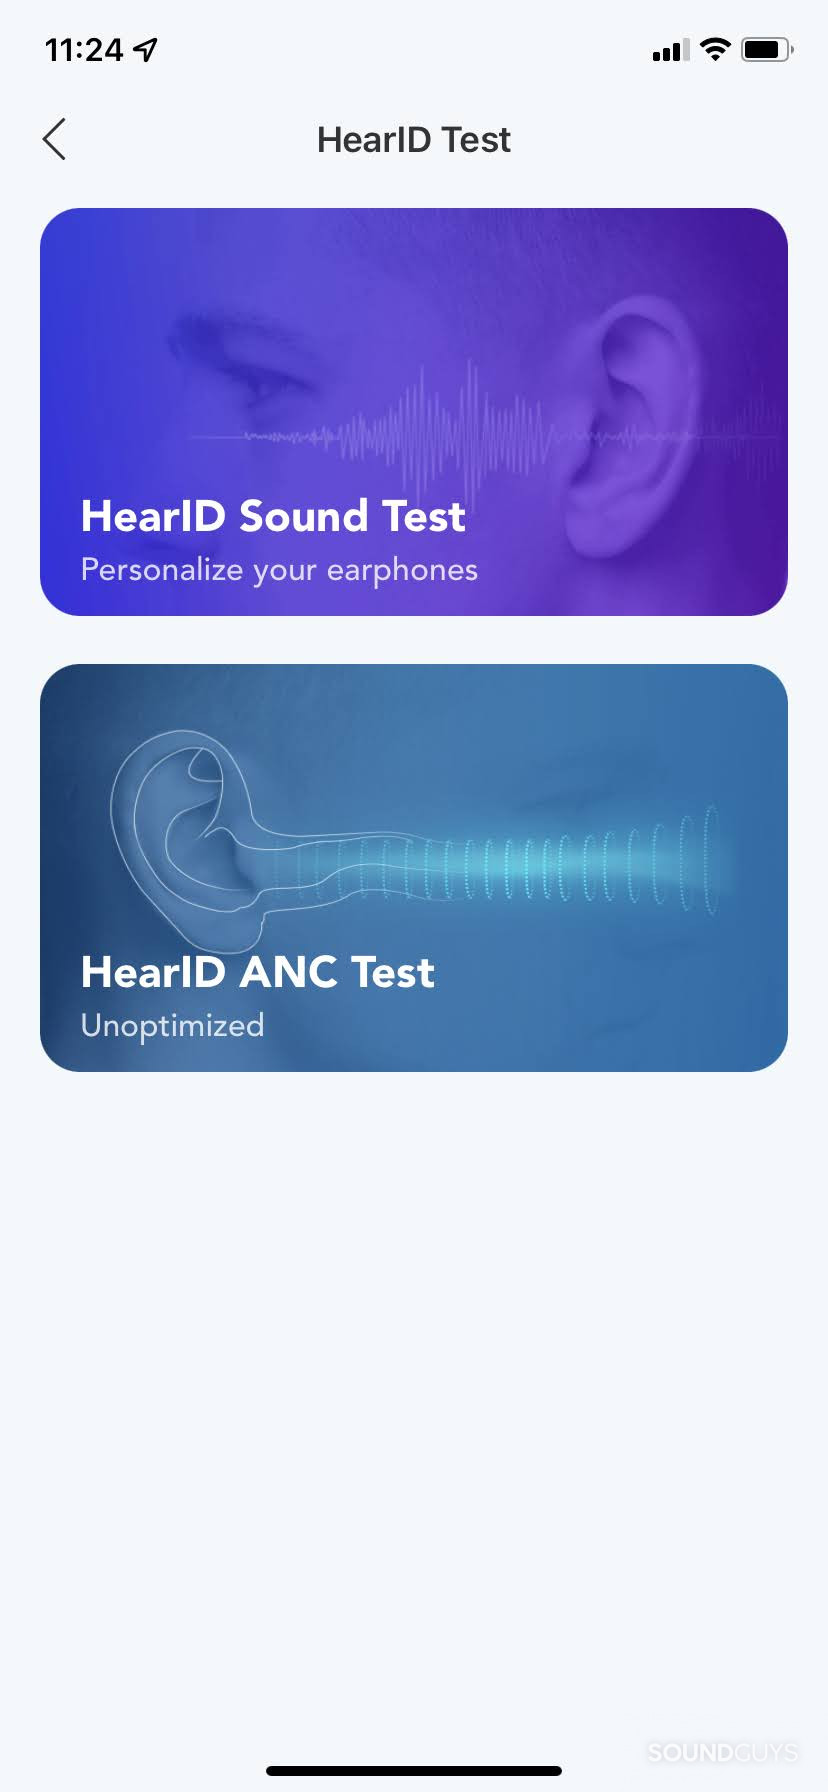 Anker Soundcore Liberty 3 Pro HearID tests within the Soundcore app.